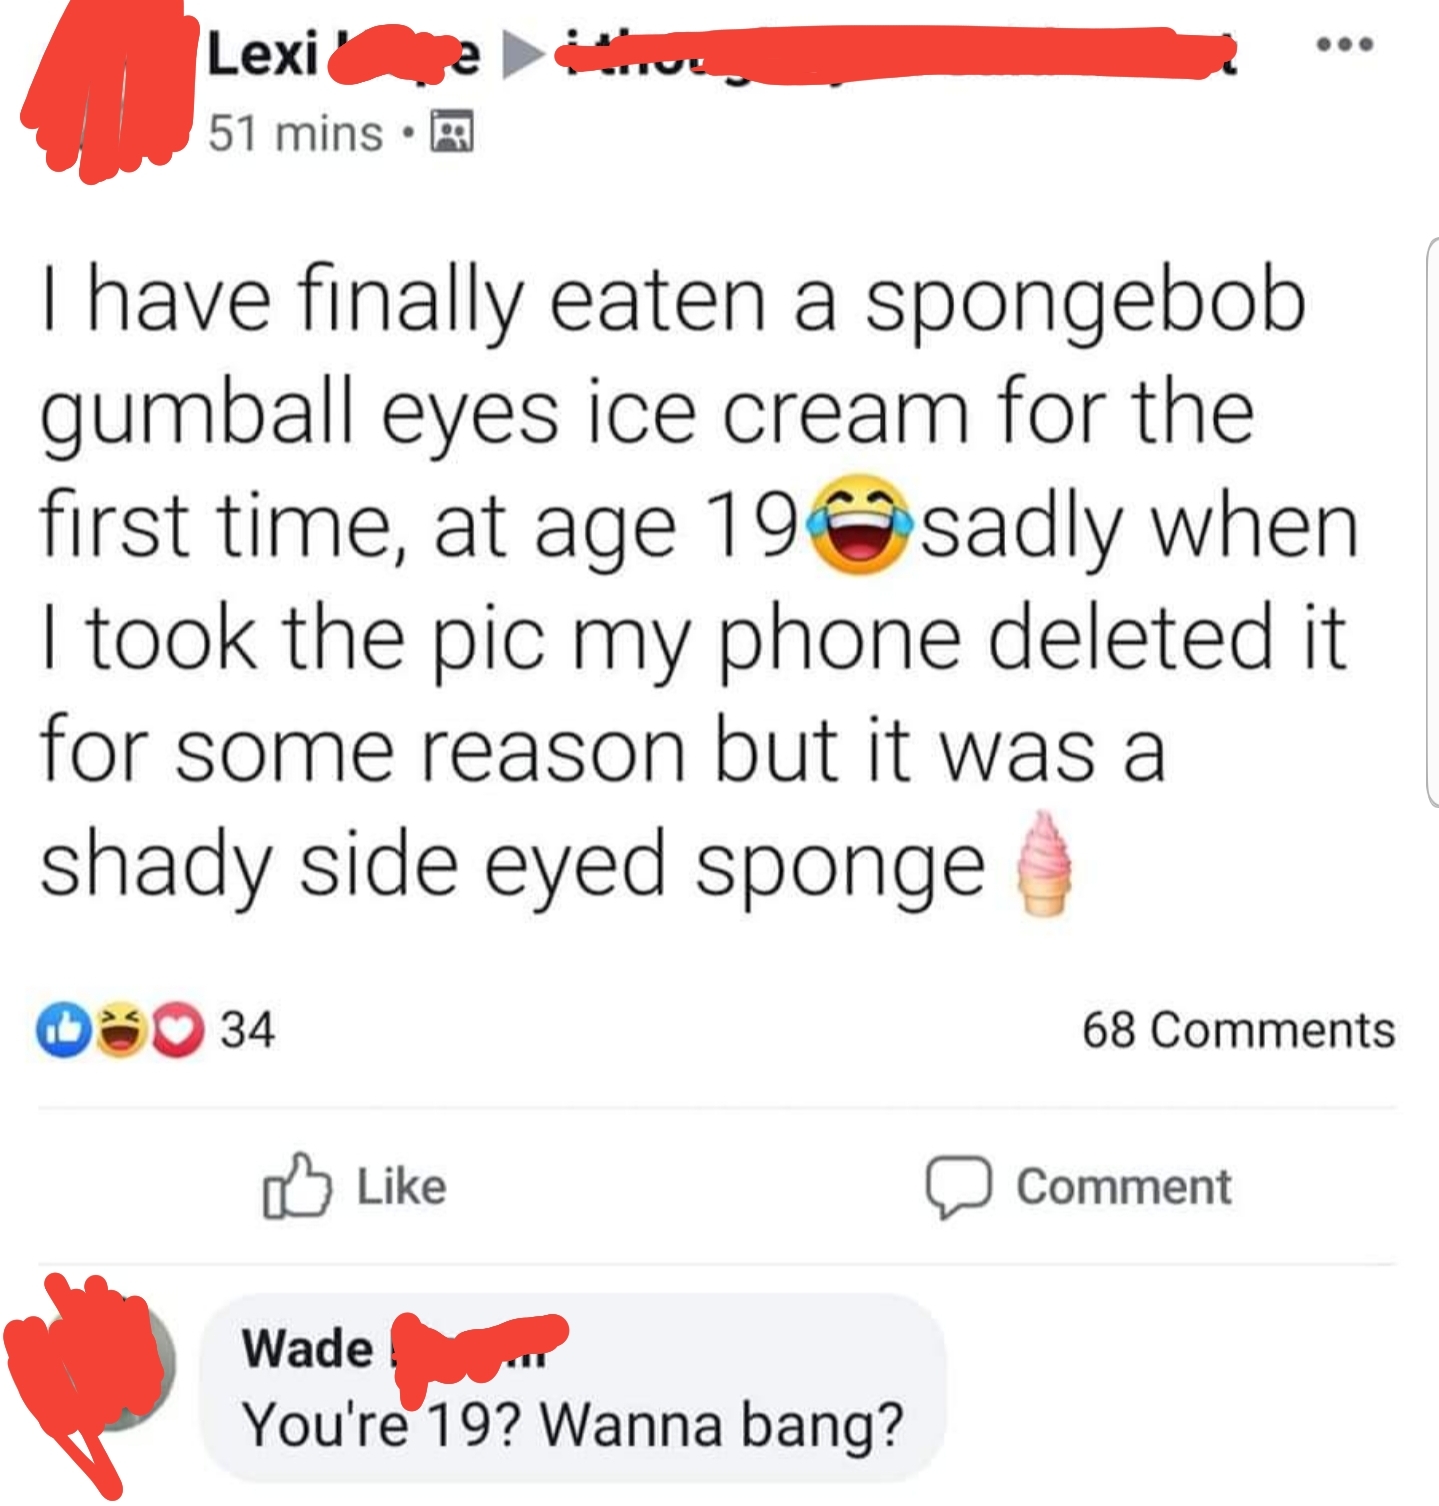 spongebob meme - point - Lexit 51 mins. T have finally eaten a spongebob gumball eyes ice cream for the first time, at age 19 sadly when I took the pic my phone deleted it for some reason but it was a shady side eyed sponge 034 68 Comment Wade You're 19? 